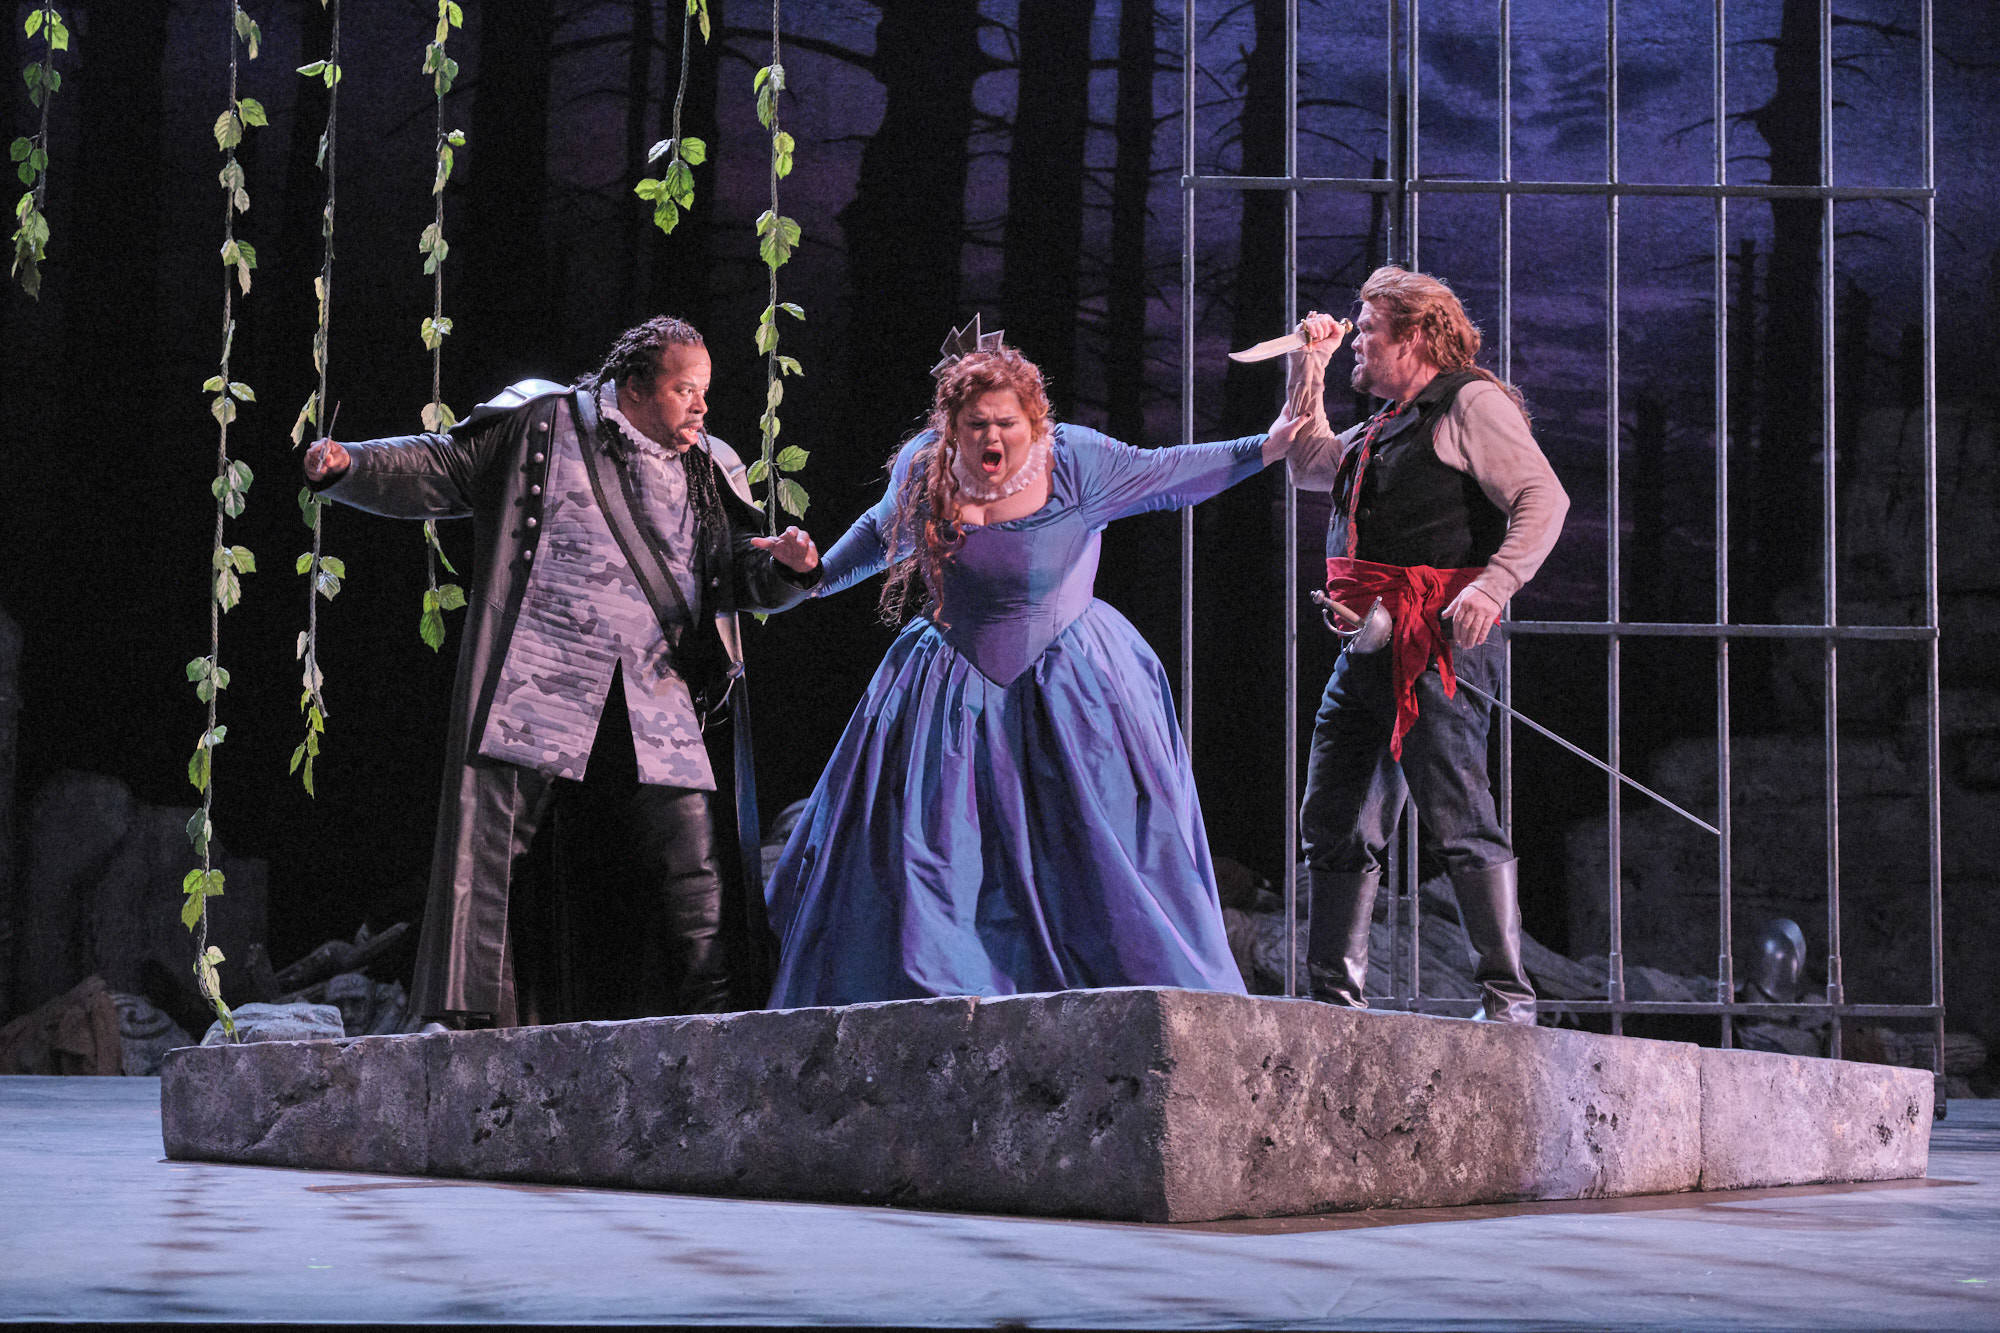 Why can’t we all just get along? Lynch, Crocetto, and Rawls in ‘Il trovatore.’ Photo by Jacob Lucas